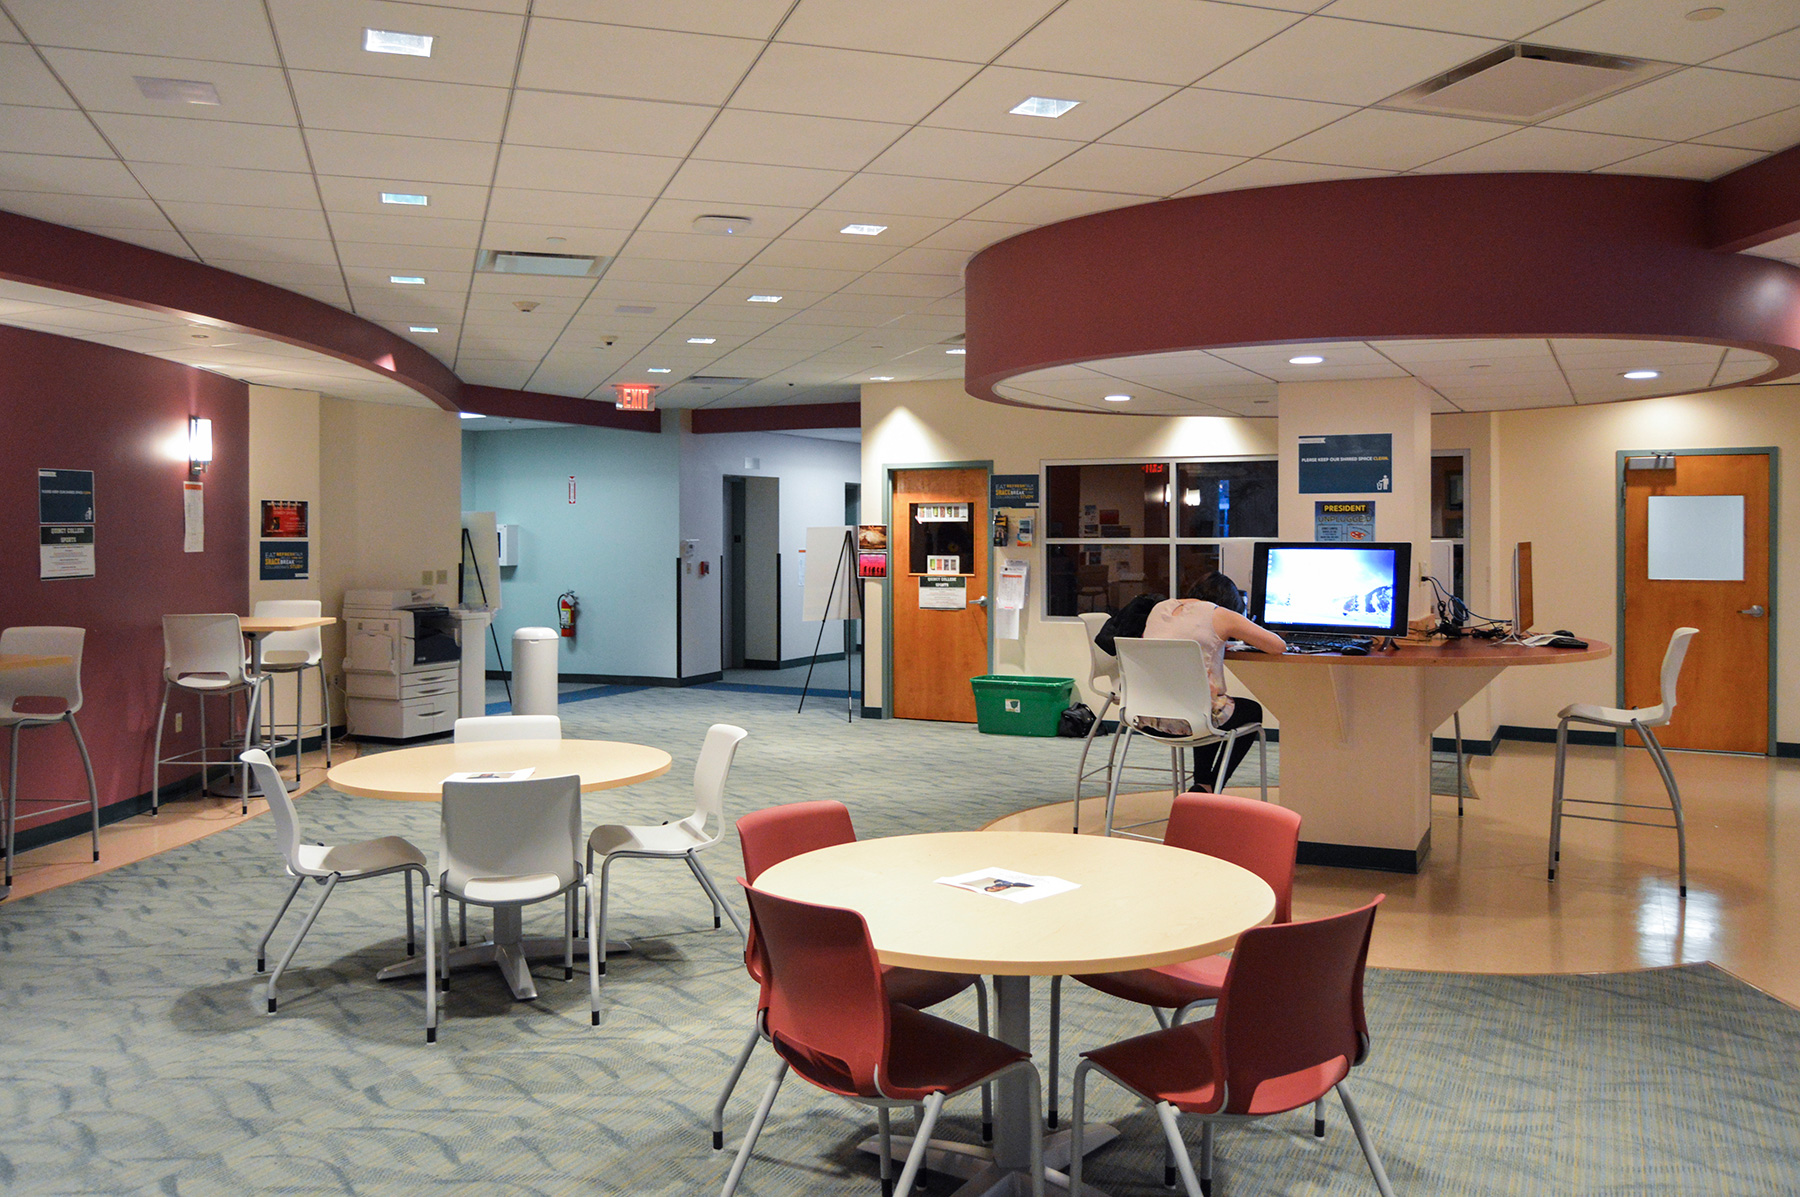 Quincy College student center seating area with tables